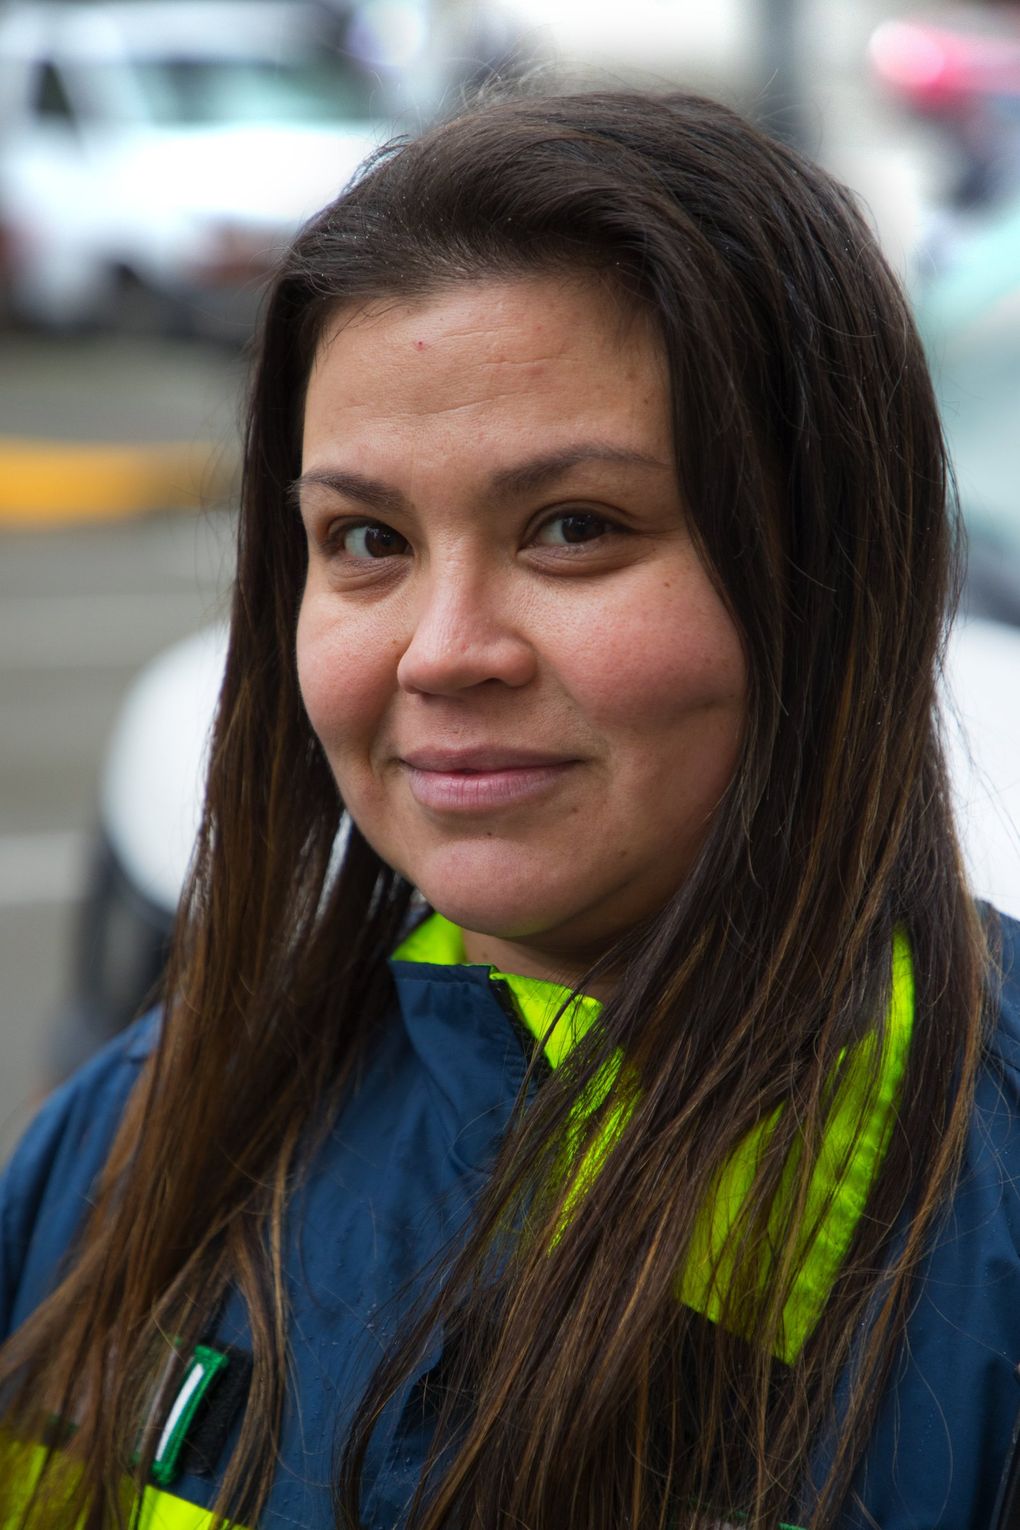 Fawn Batten is a downtown Seattle ambassador for the Metropolitan Improvement District, a program managed by the Downtown Seattle Association. She checks on homeless people in alleys, doorways and under viaducts and bridges. (Mike Siegel / The Seattle Times)